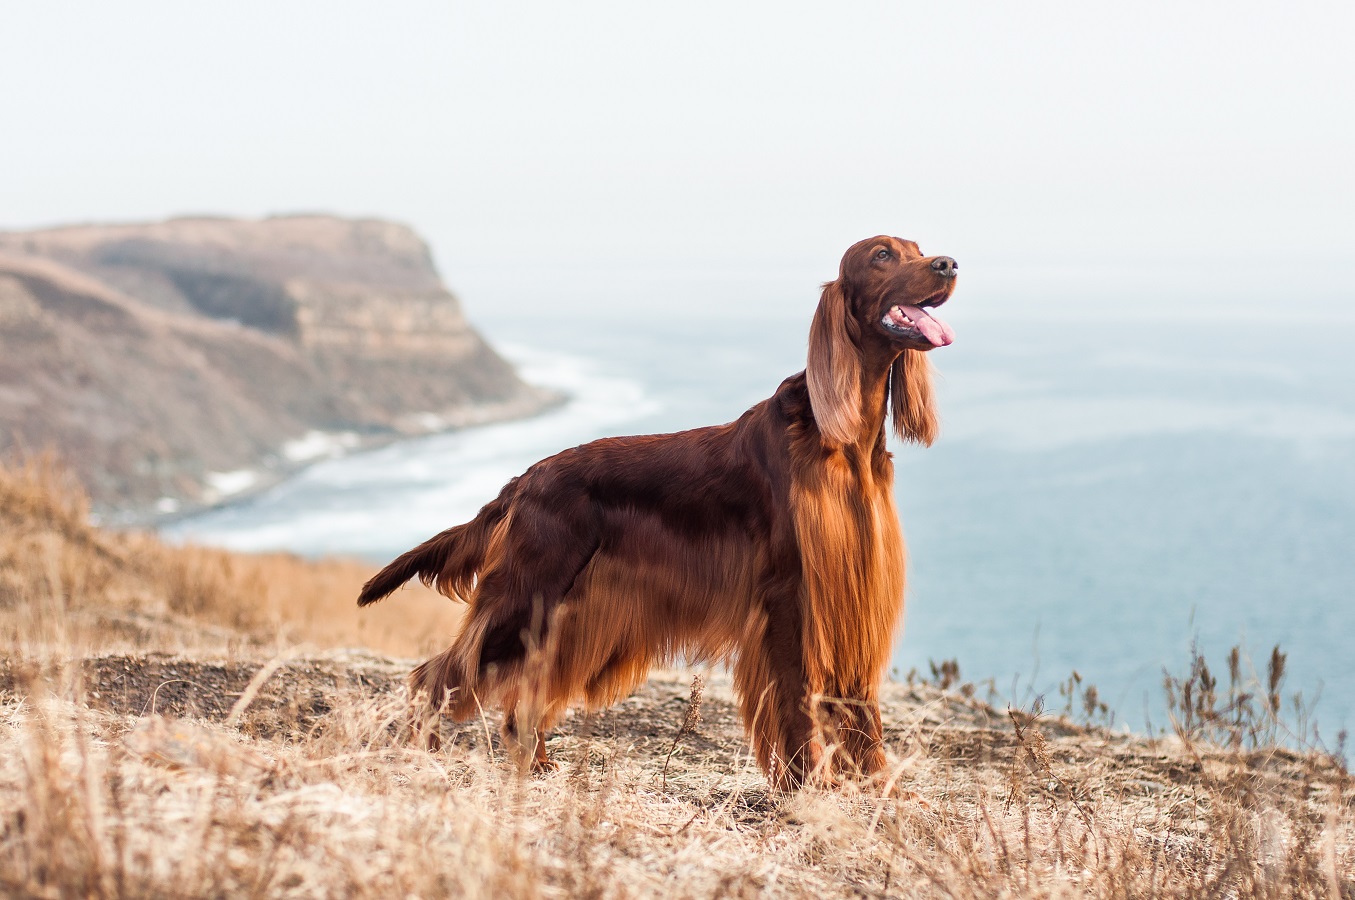 Marvelous Irish Setter - Lifespan, Personality and Care of the Breed